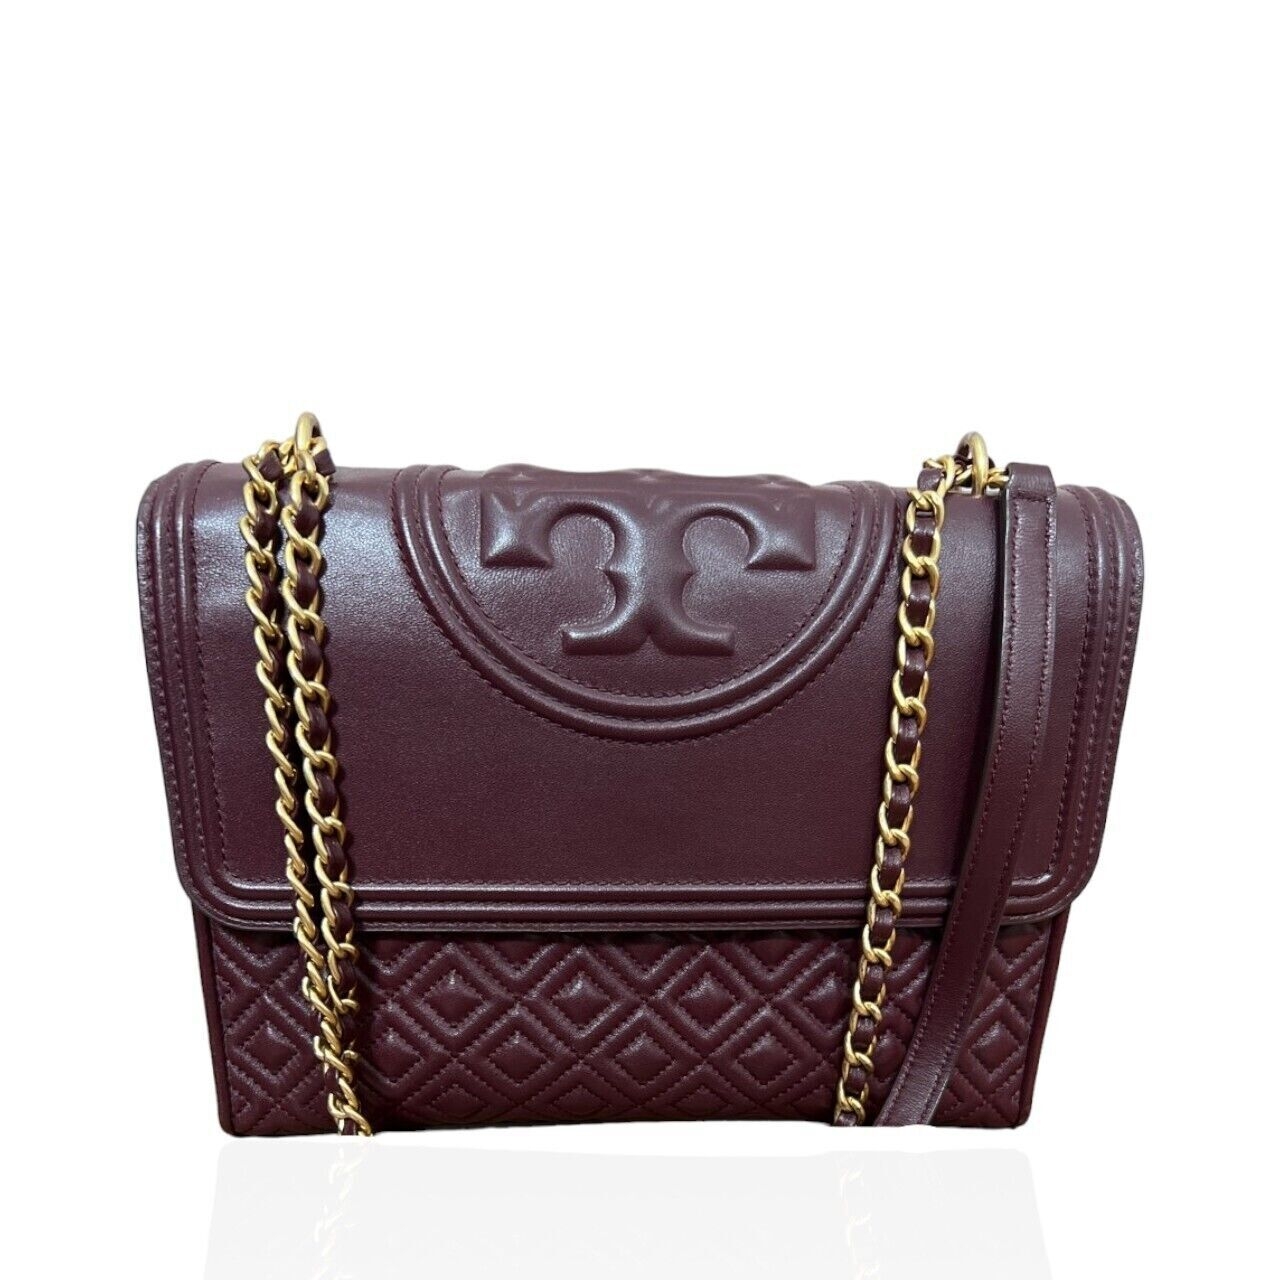 Tory Burch Fleming Convertible Claret Leather GHW Shoulder Bag